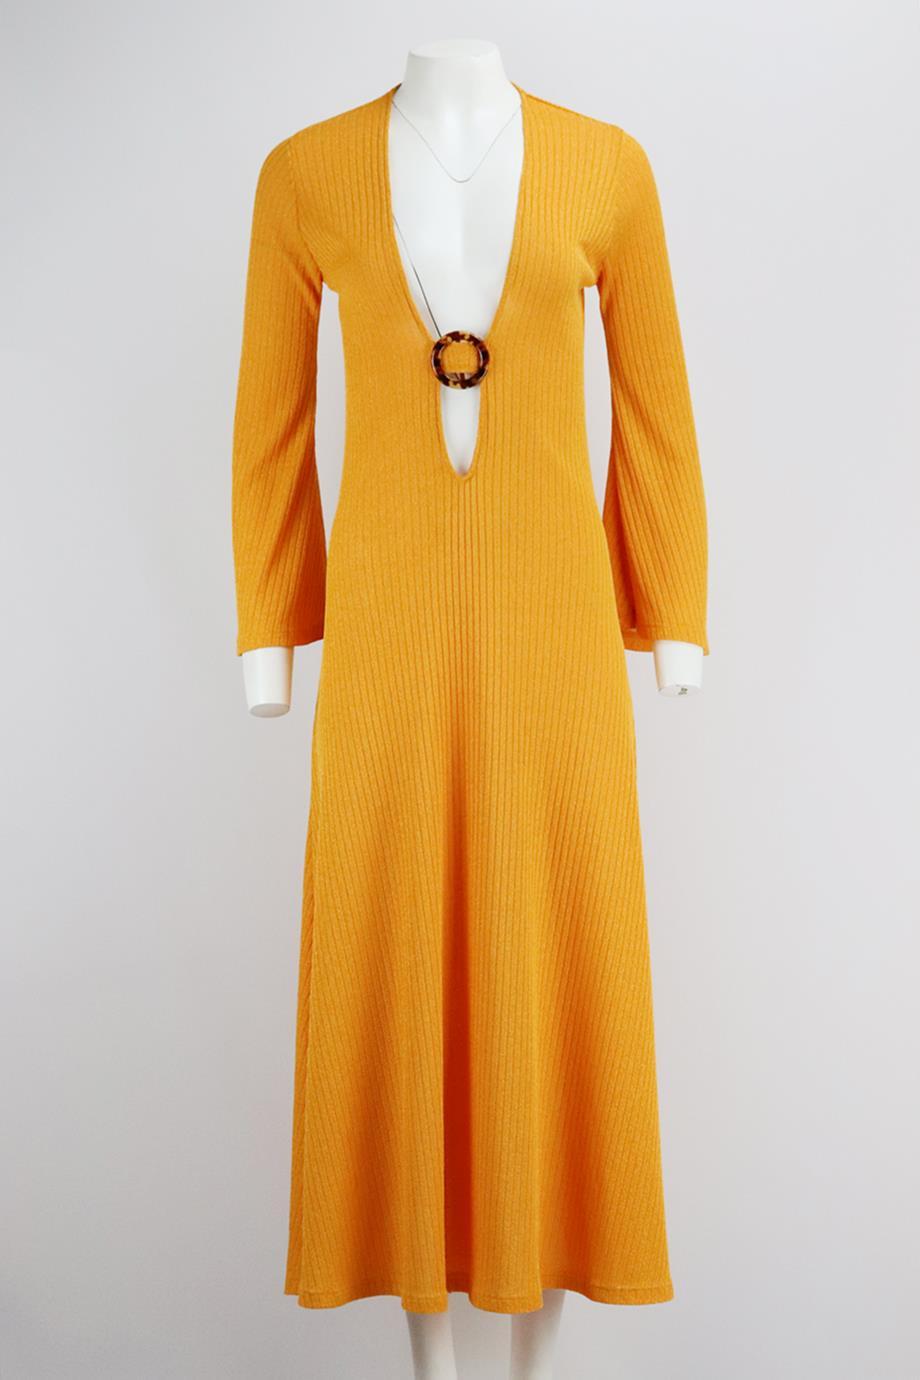 Dodo Bar Or cutout ribbed knit midi dress. Orange. Long sleeve, v-neck. Slips on. 100% Polyester. Size: IT 40 (UK 8, US 4, FR 36). Bust: 31 in. Waist: 28 in. Hips: 52 in. Length: 54 in. Very good condition - No sign of wear; see pictures.
